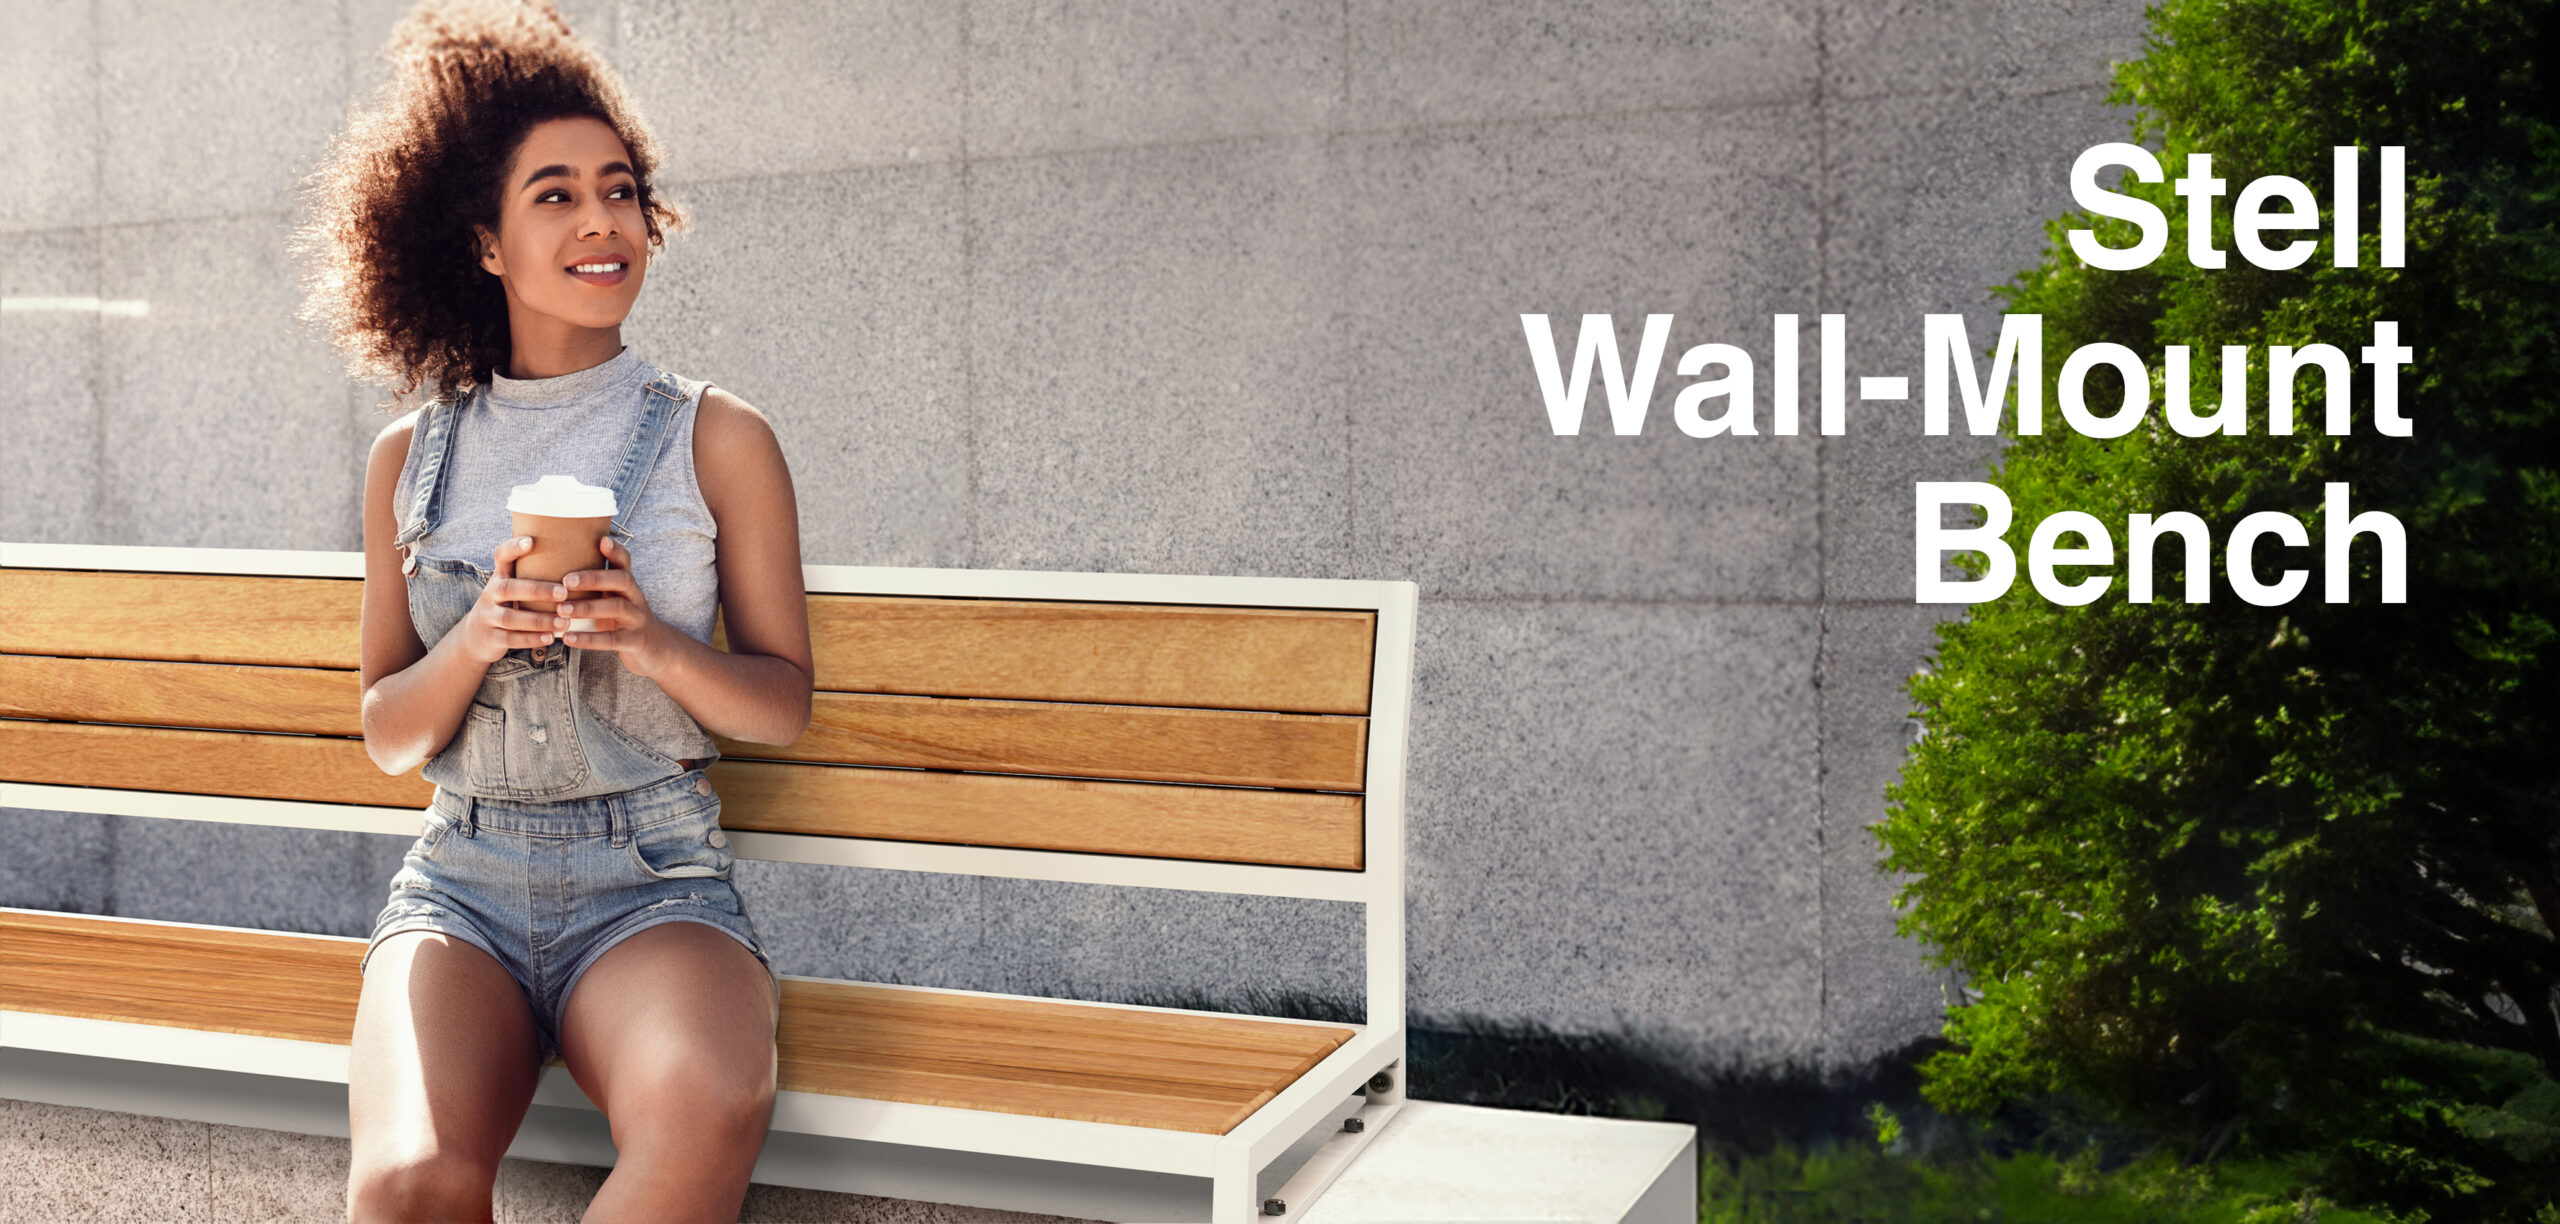 New! Stell Wall-Mount Bench